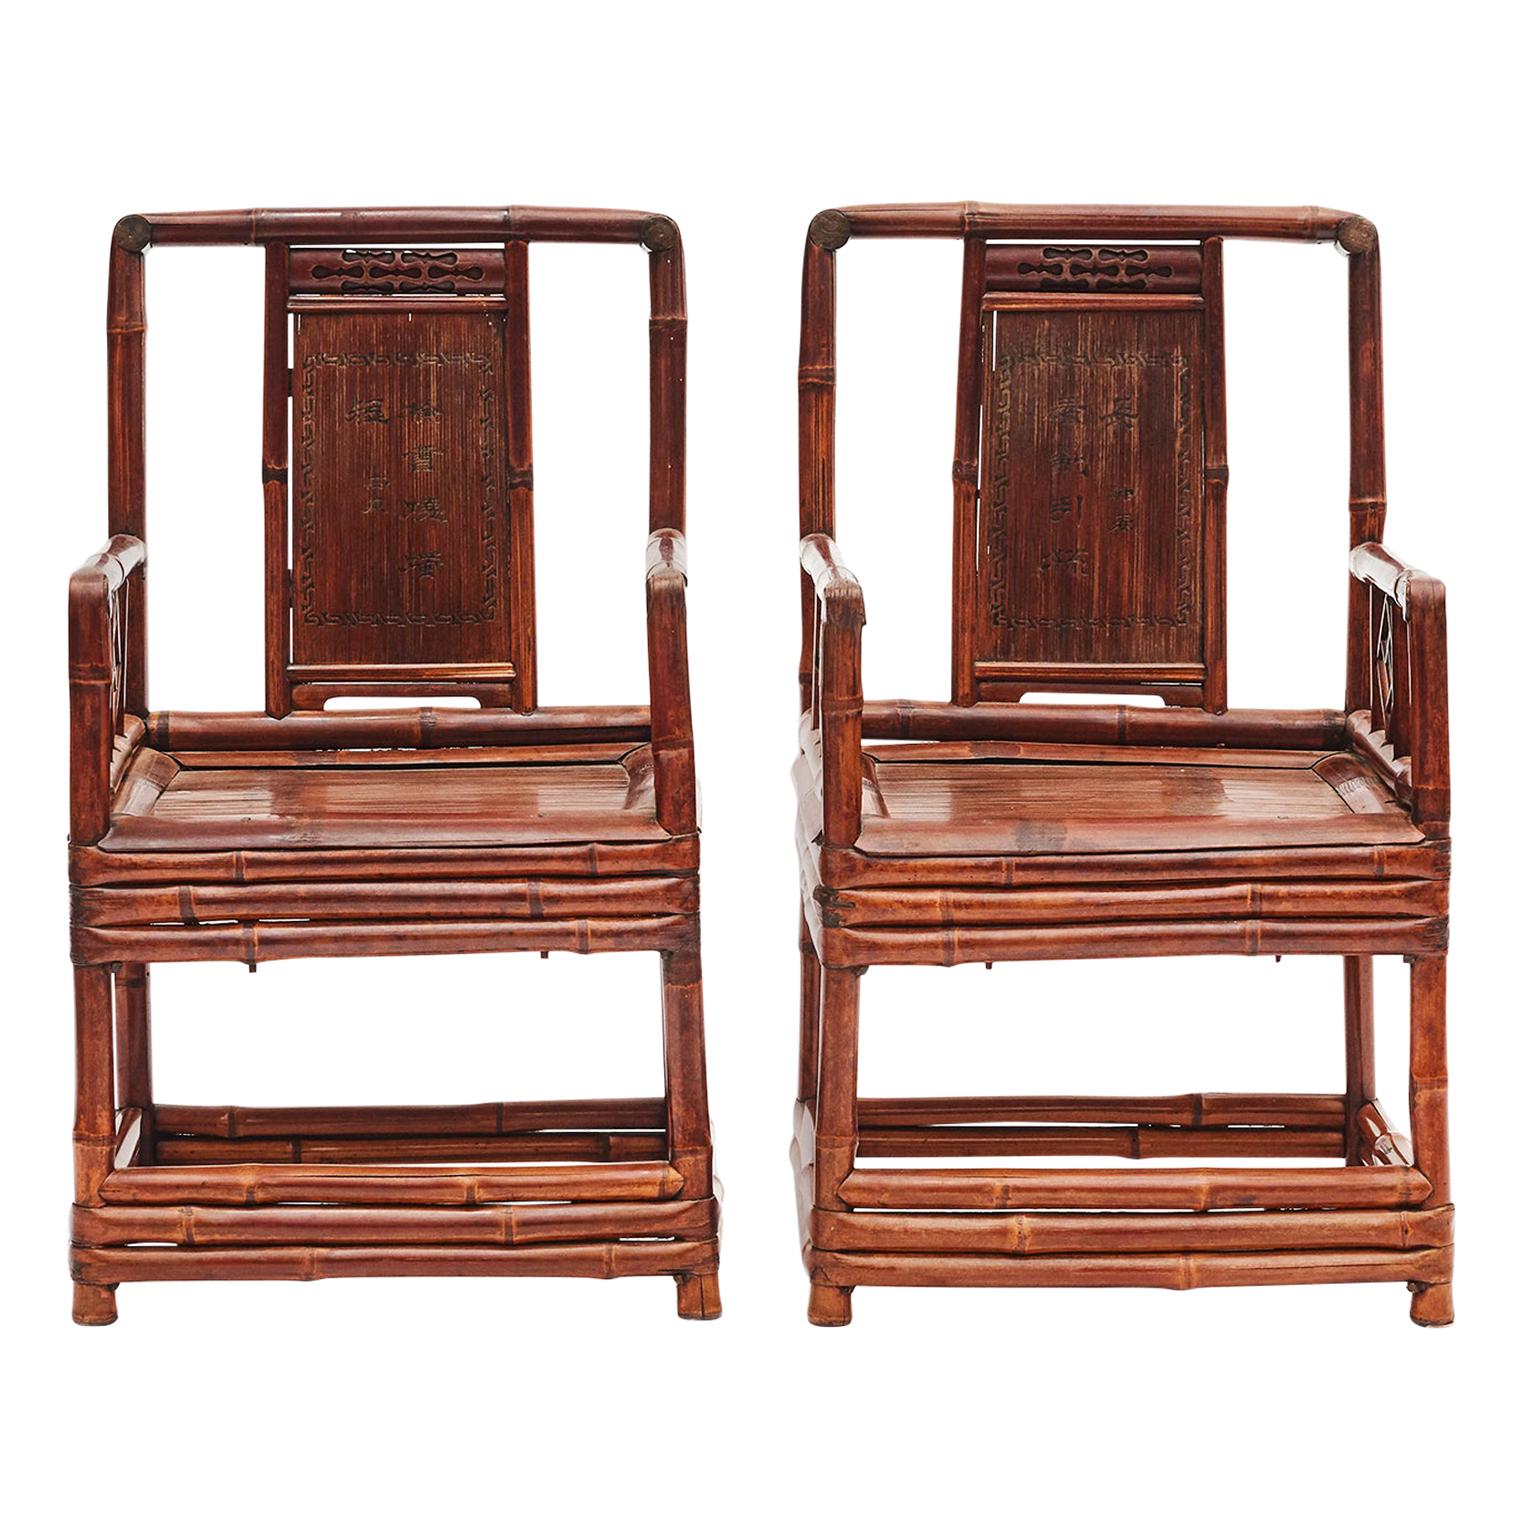 Pair of Chinese Qing Dynasty Bamboo Chairs with Calligraphy